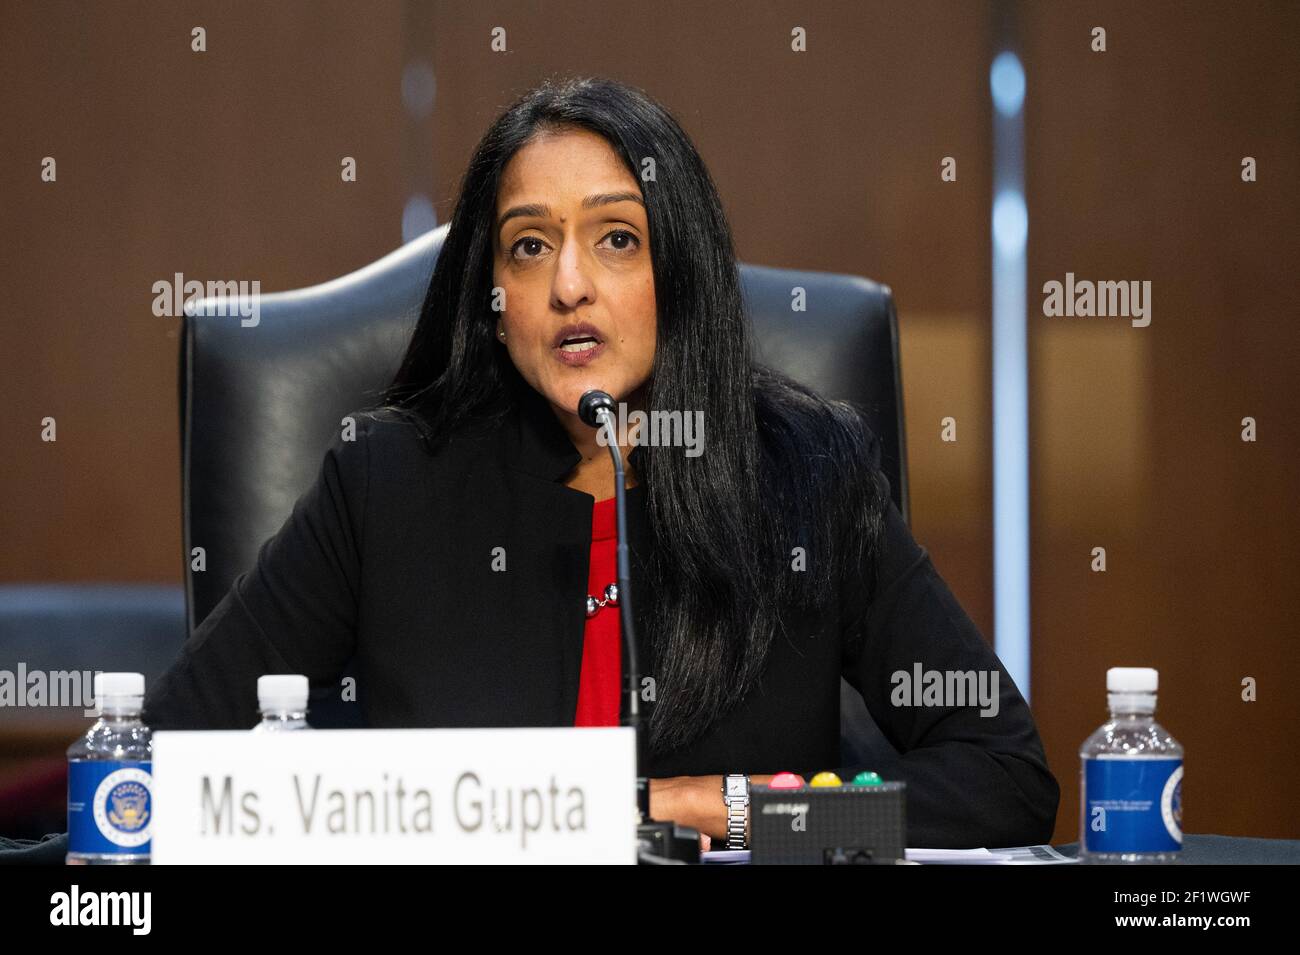 Washington, U.S. 09th Mar, 2021. March 9, 2021 - Washington, DC, United States: Vanita Gupta, nominee to be Associate Attorney General of the Department of Justice, speaking at a hearing of the Senate judiciary Committee. (Photo by Michael Brochstein/Sipa USA) Credit: Sipa USA/Alamy Live News Stock Photo